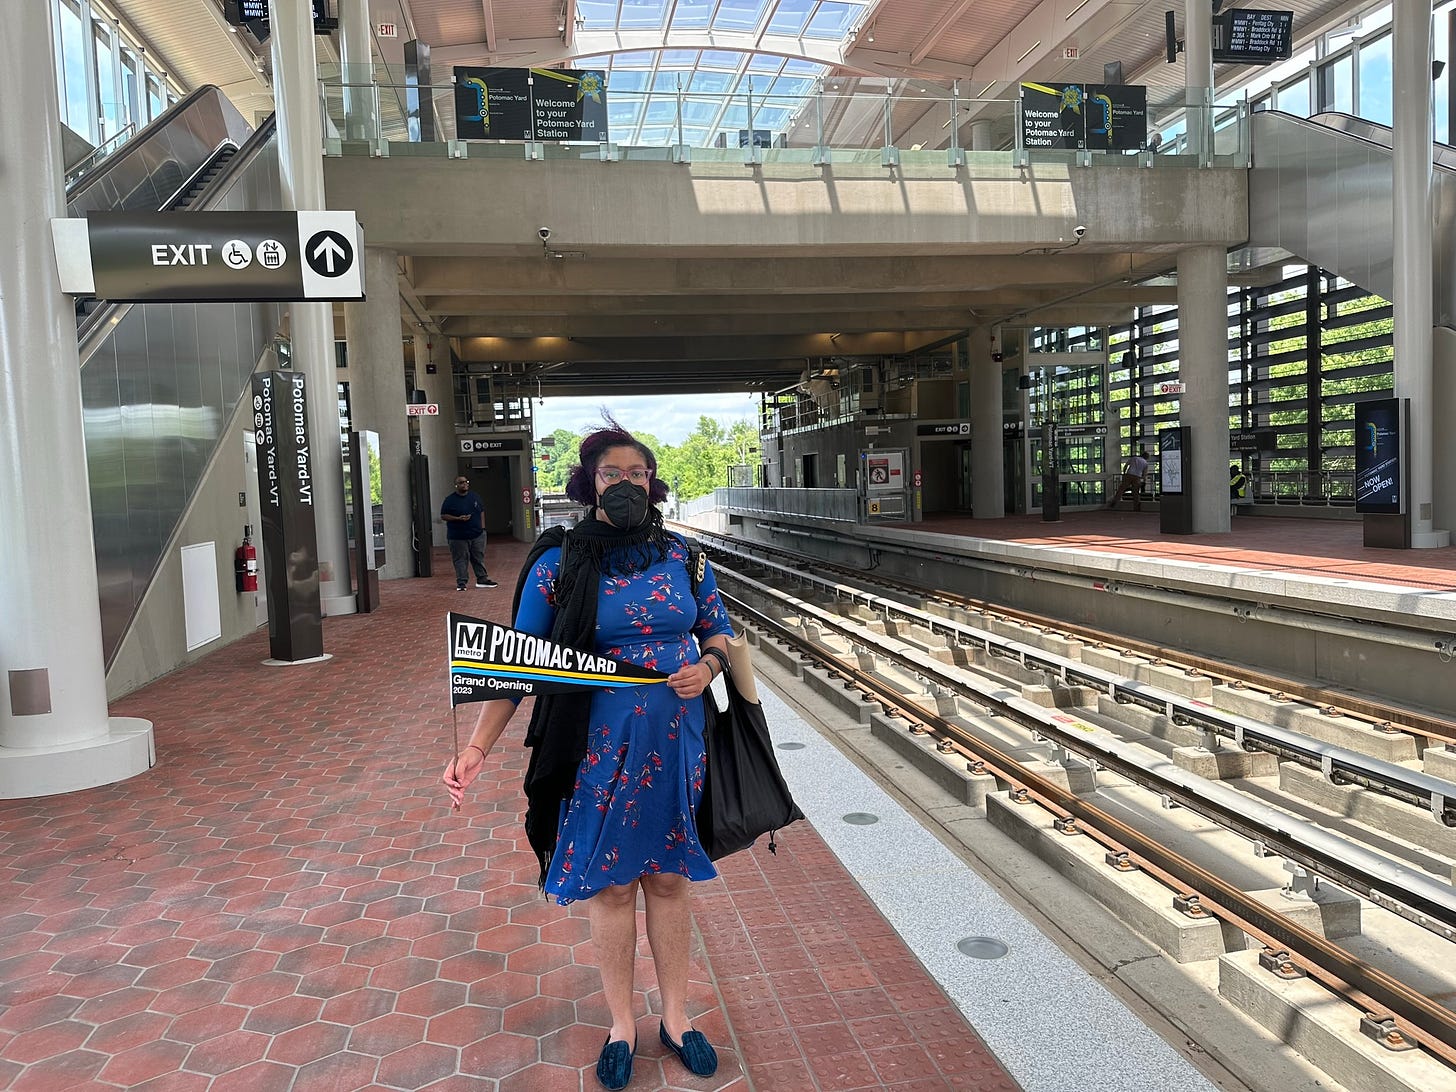 Kristen is wearing a light-skin mid-size Black person wearing a blue floral dress and black N95 respirator  holding a black banner with Potomac Yard printed on it. She’s standing on a orange/grey hexagon tile pattern next to the new Potomac yard Metro tain tracks facing the camera. The station mezzanine is above her head and has openings to the  outside.